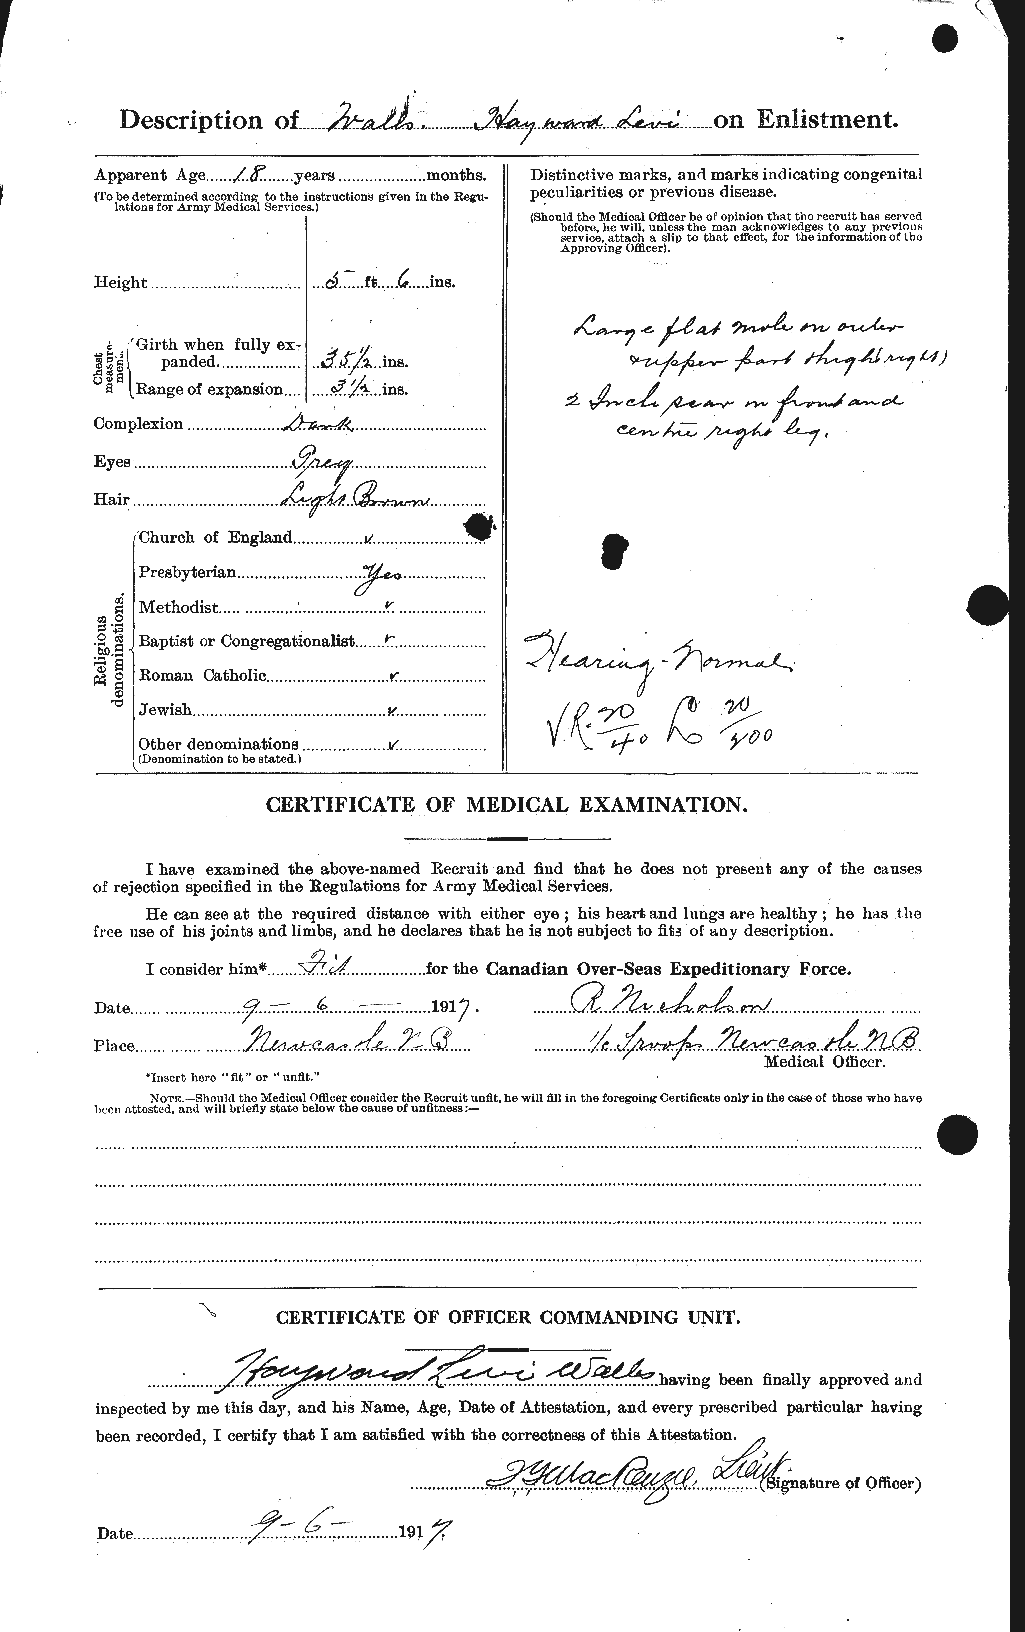 Personnel Records of the First World War - CEF 667045b